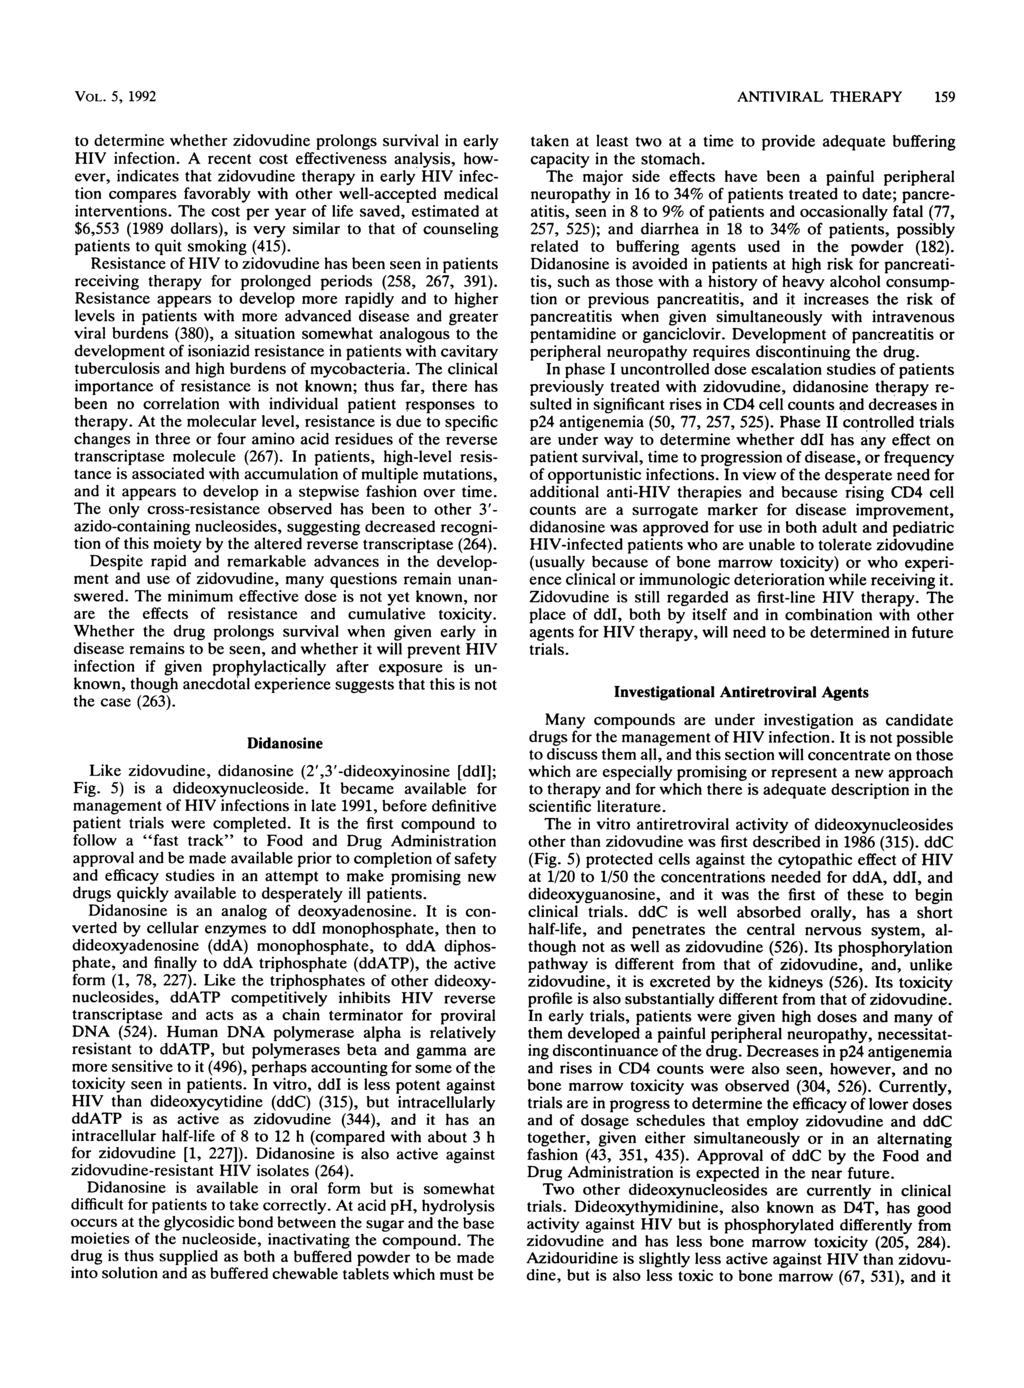 VOL. 5, 1992 to determine whether zidovudine prolongs survival in early HIV infection.